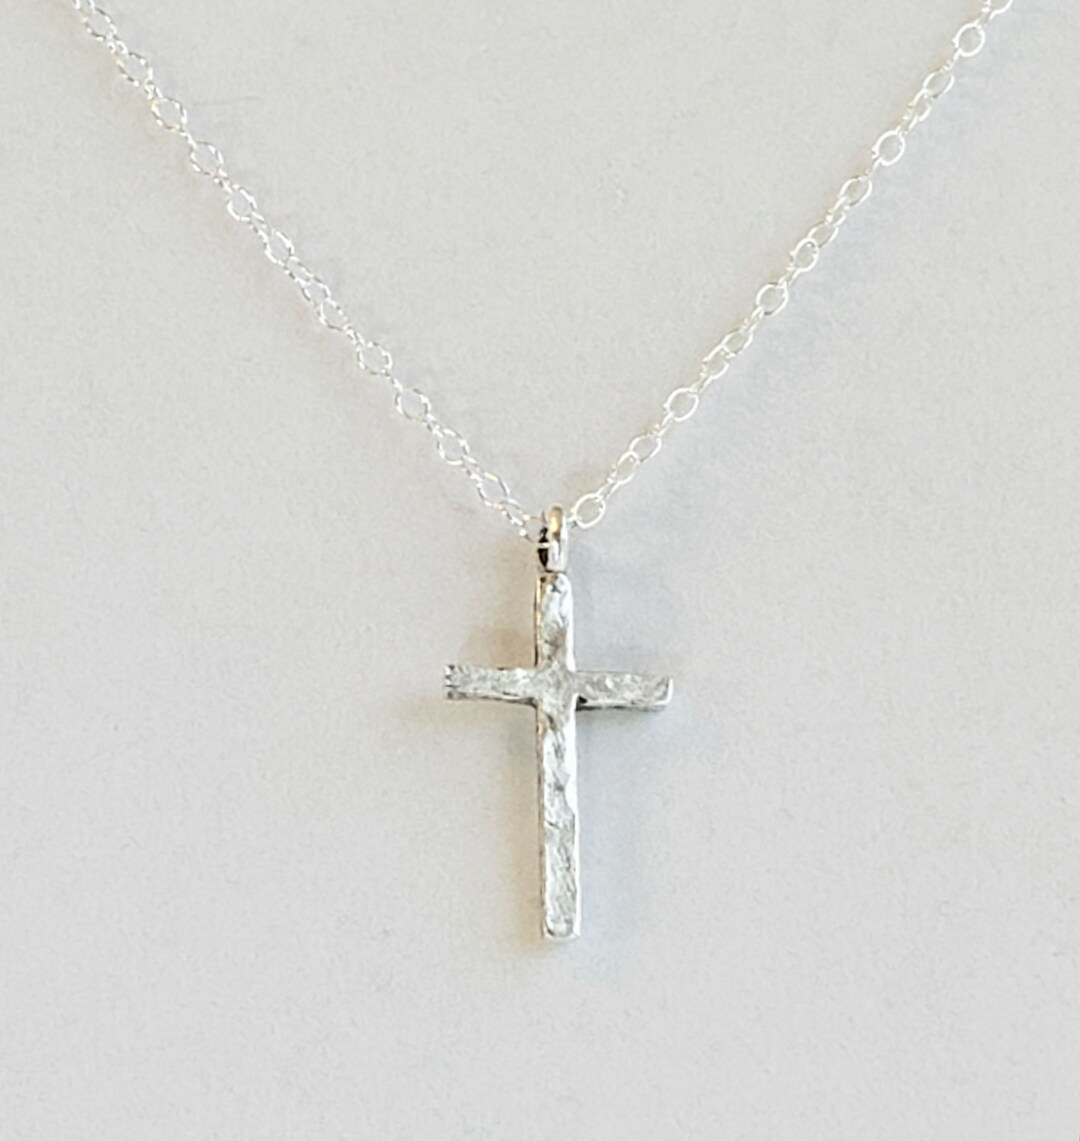 Men's Hammered Silver Cross Pendant or Necklace in - Etsy